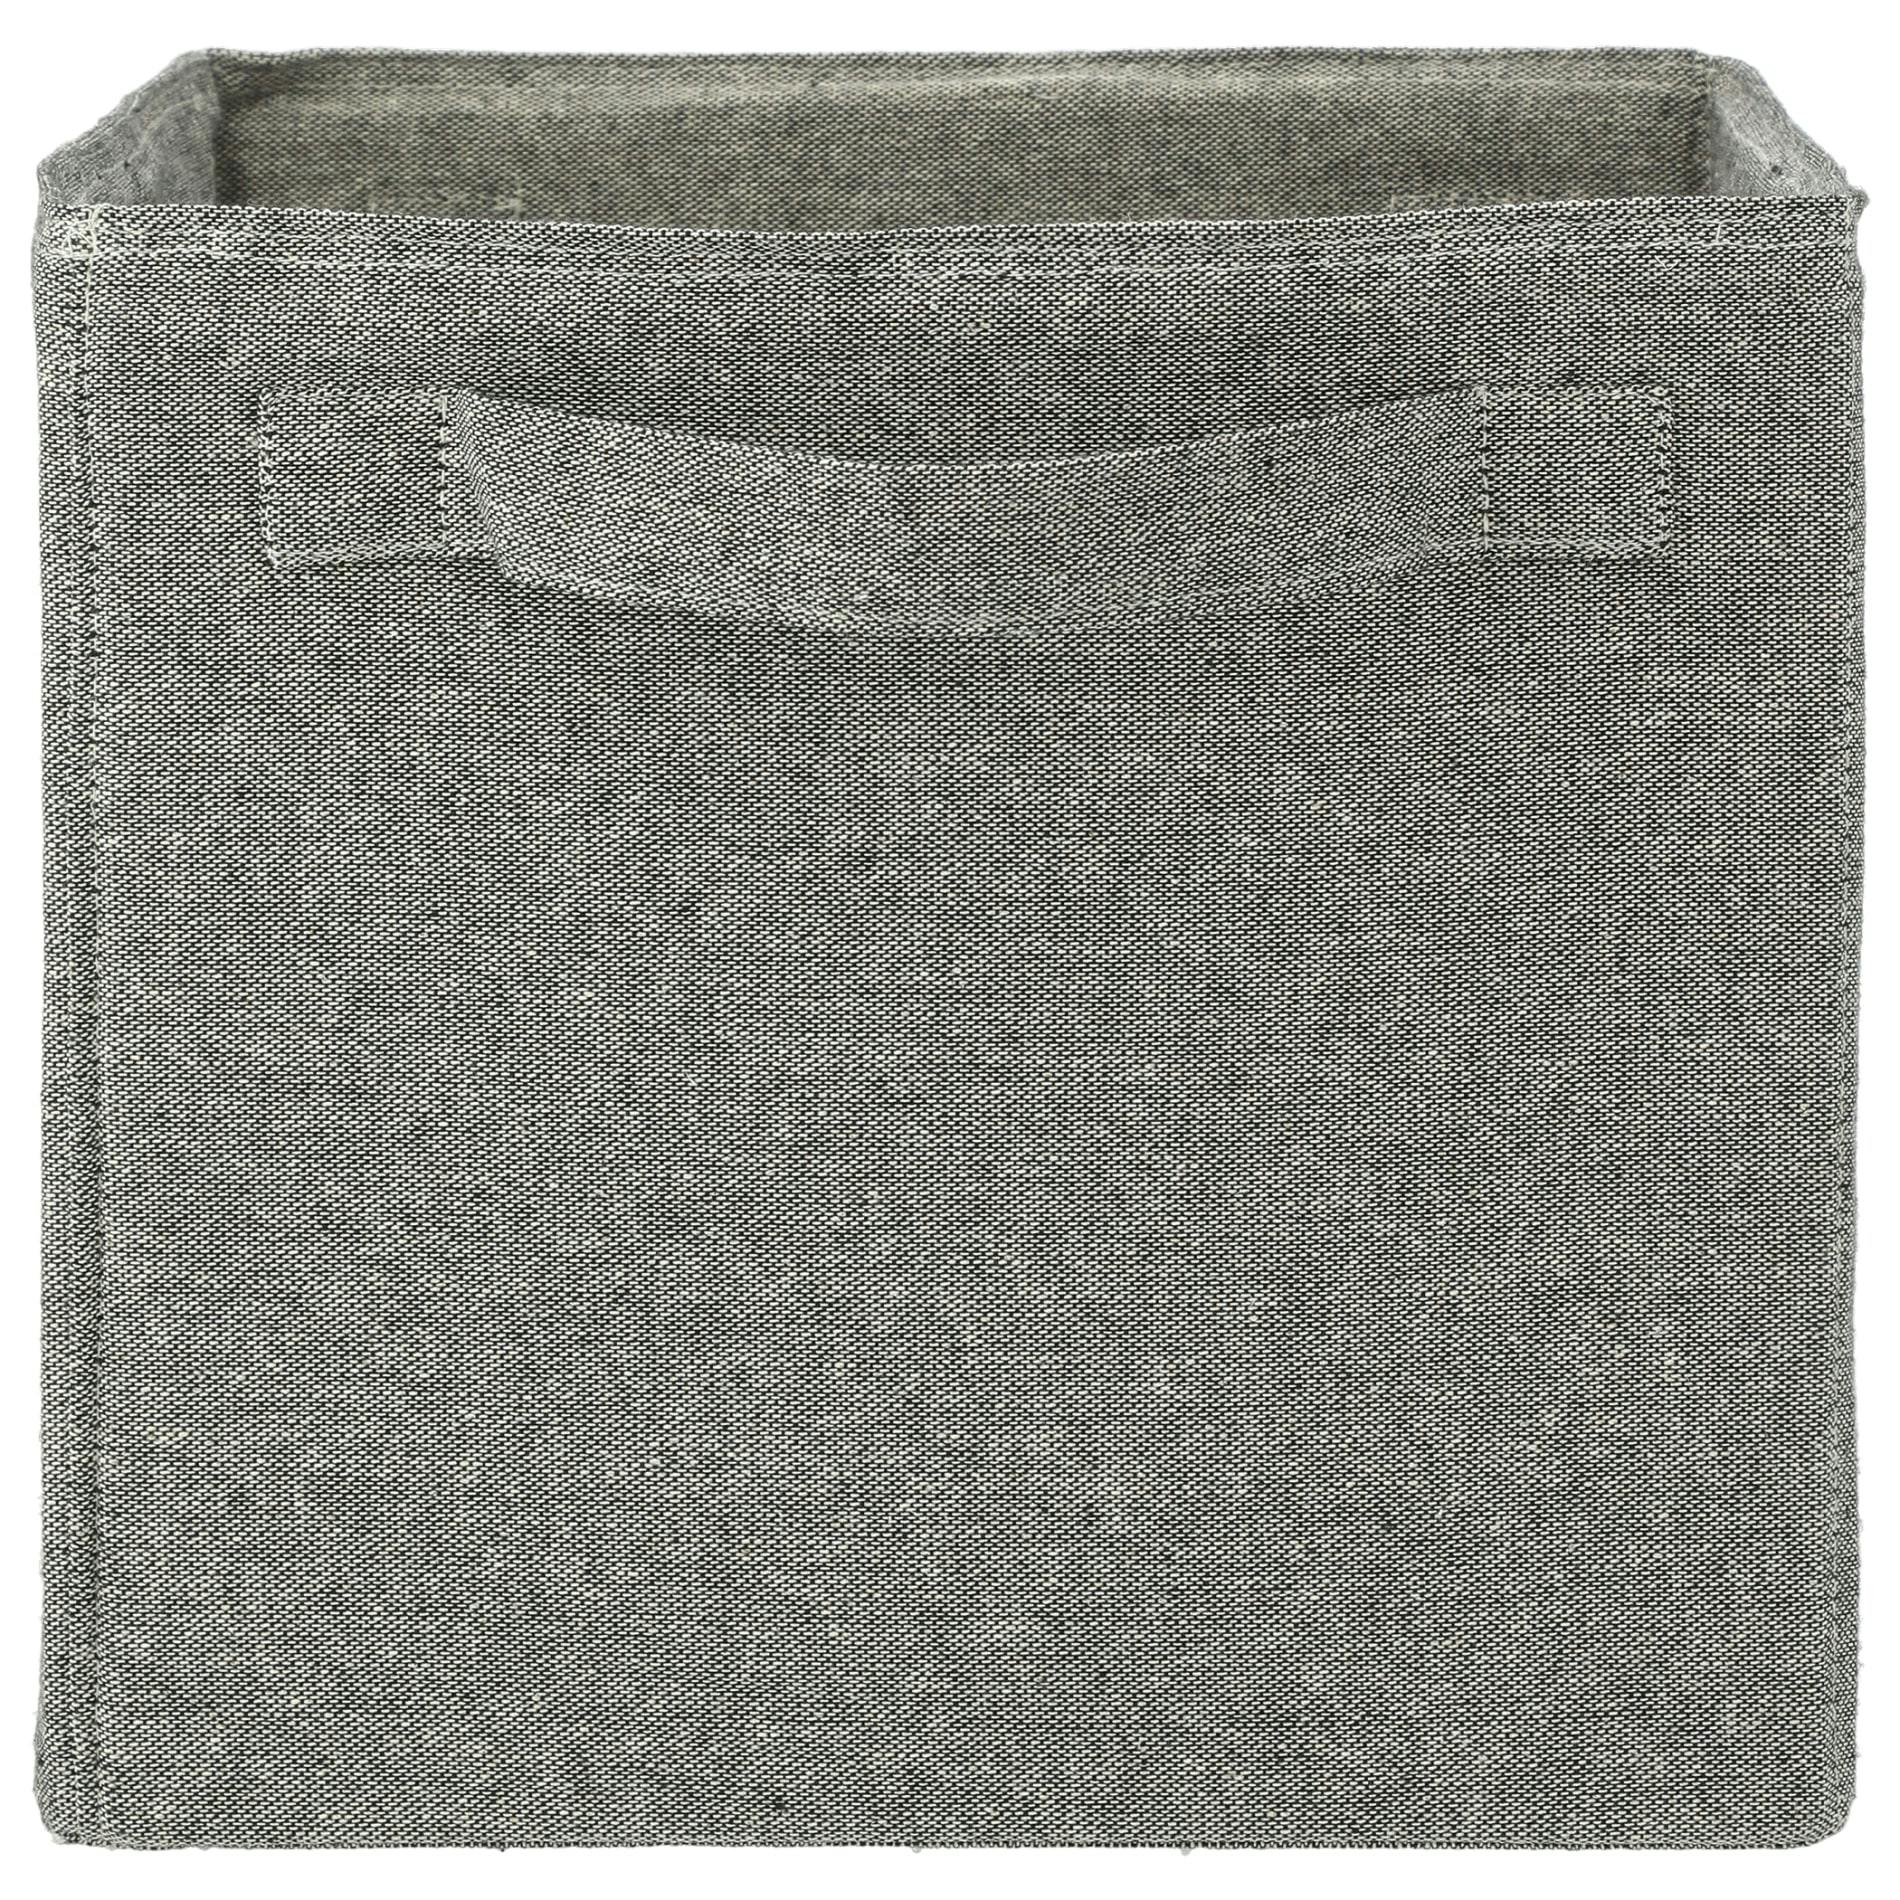 Recycled Cotton Storage Cube - additional Image 5